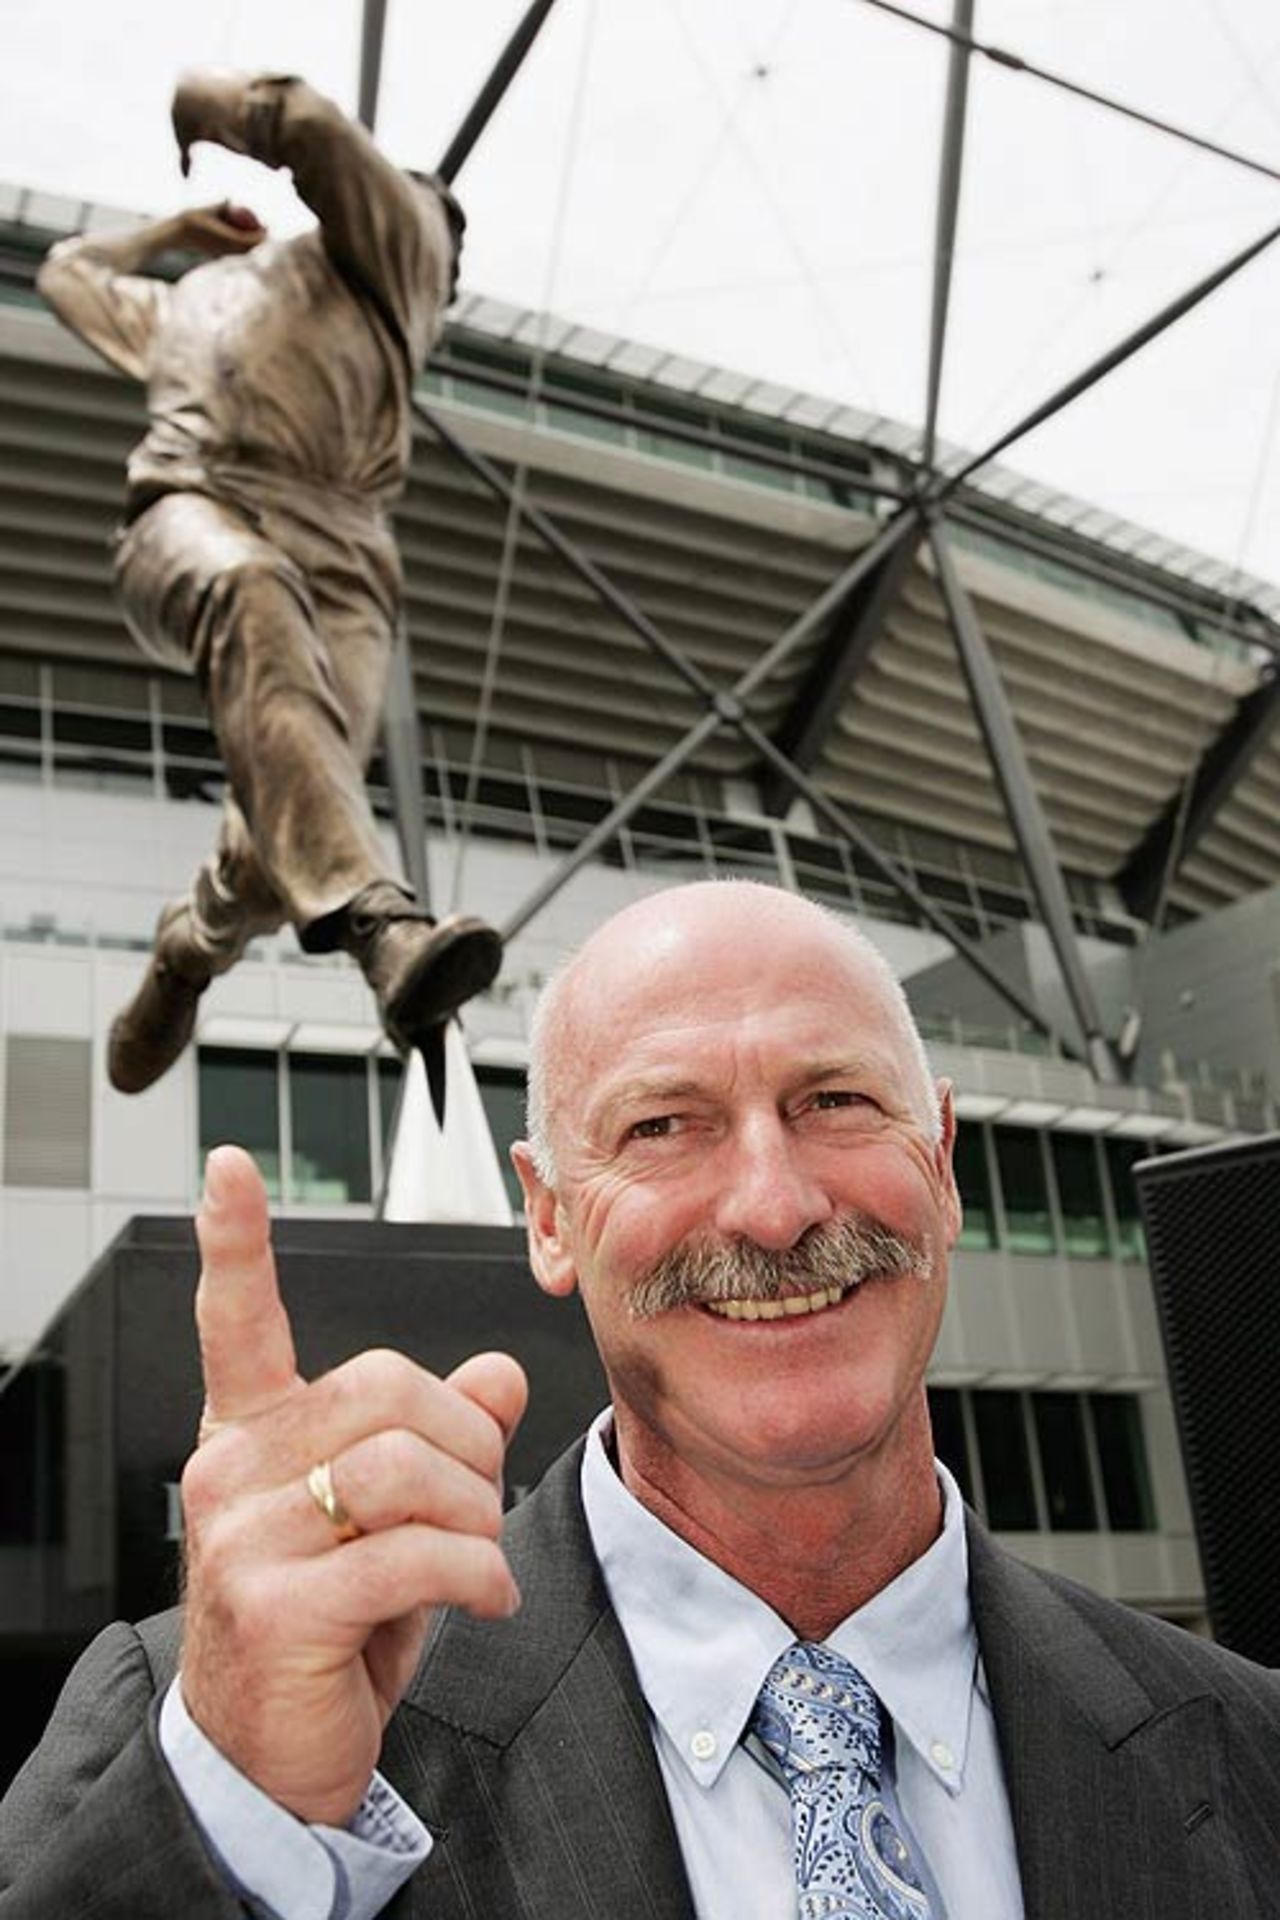 Dennis Lillee unveils a statue of himself as part of the Walk of the Champions at the Melbourne Cricket Ground, Melbourne, December 22, 2006